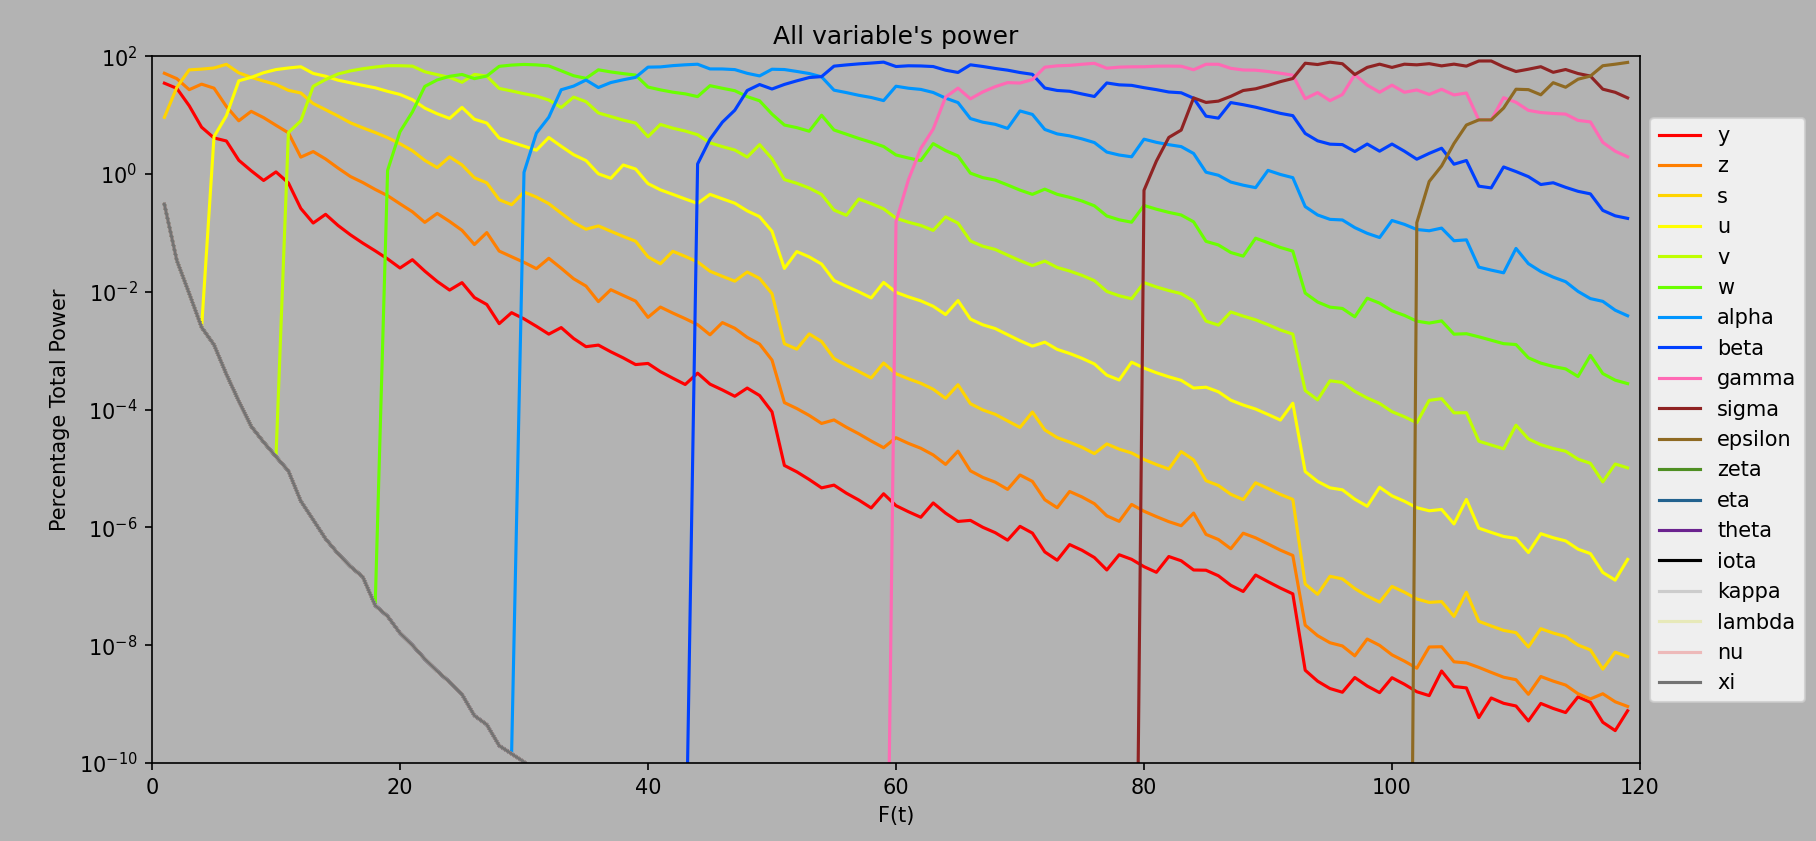 Logged percentage variable power up to ee120